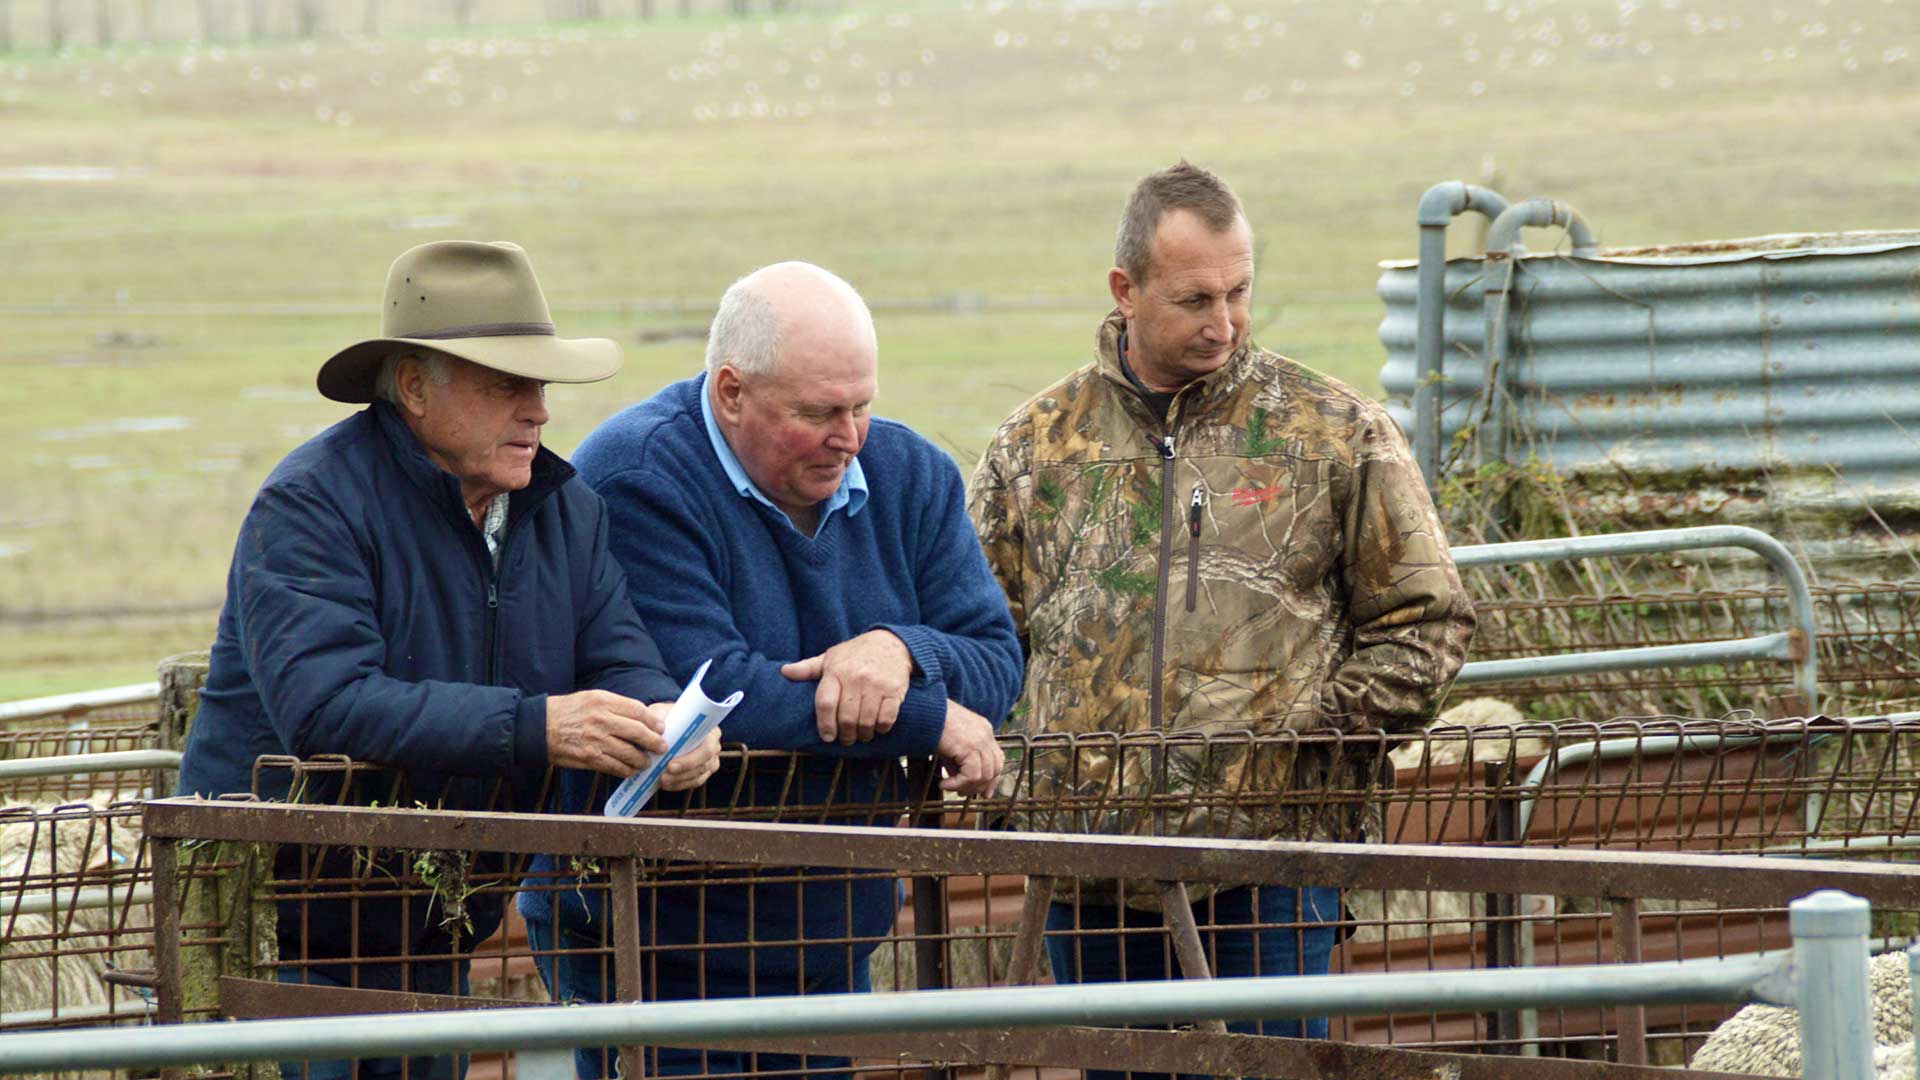 New England - Old Hands Inspecting the Merchandise | Merino Superior Sires